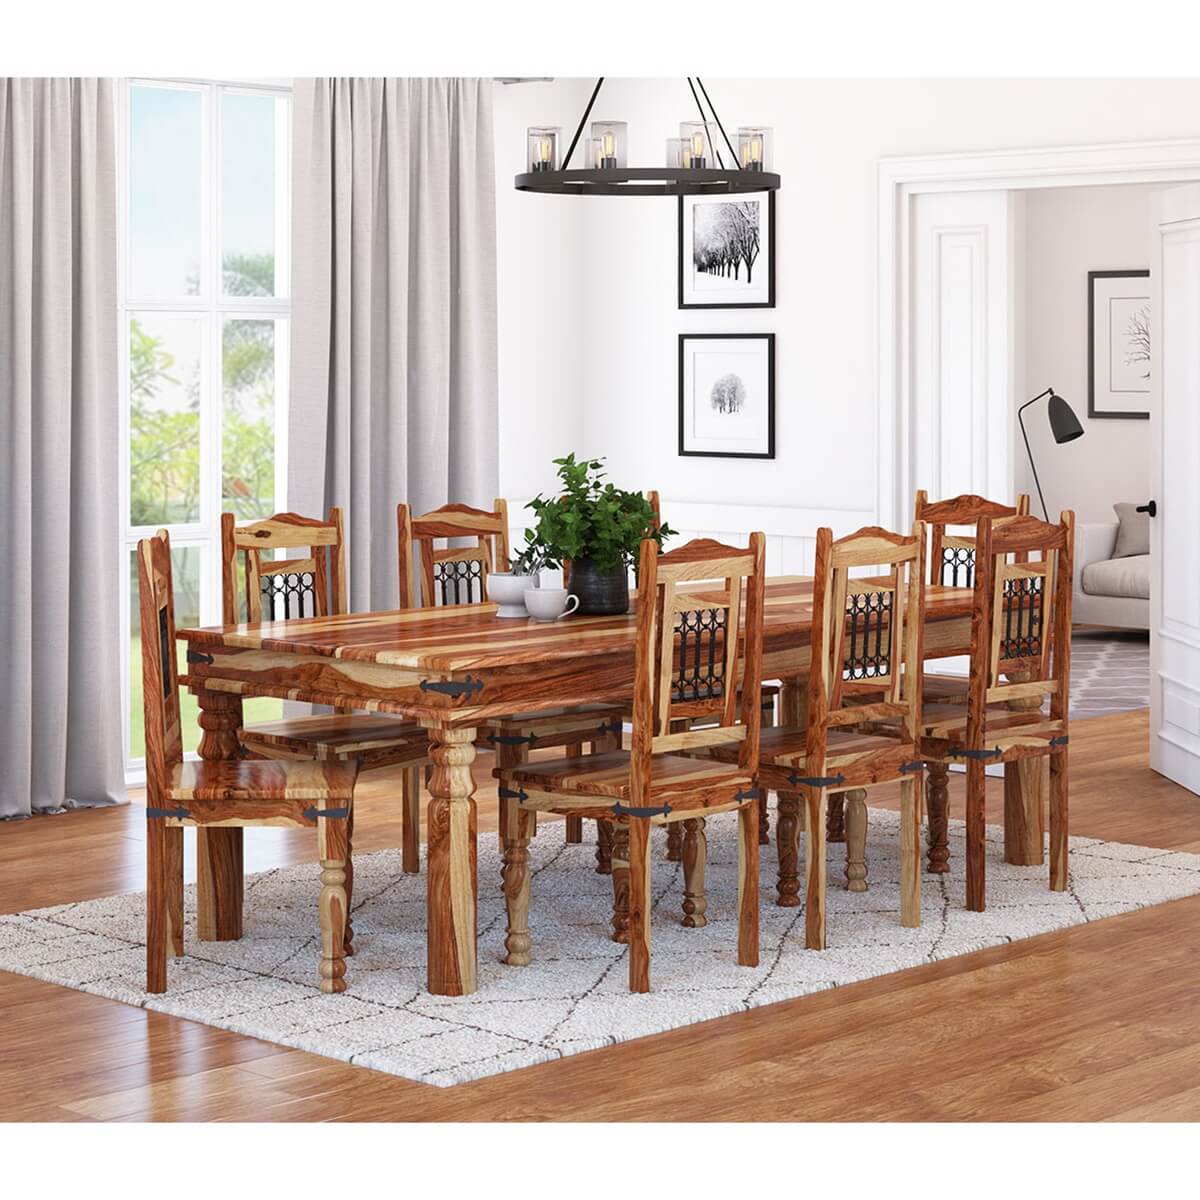 Solid Wood Rustic Dining Room Table